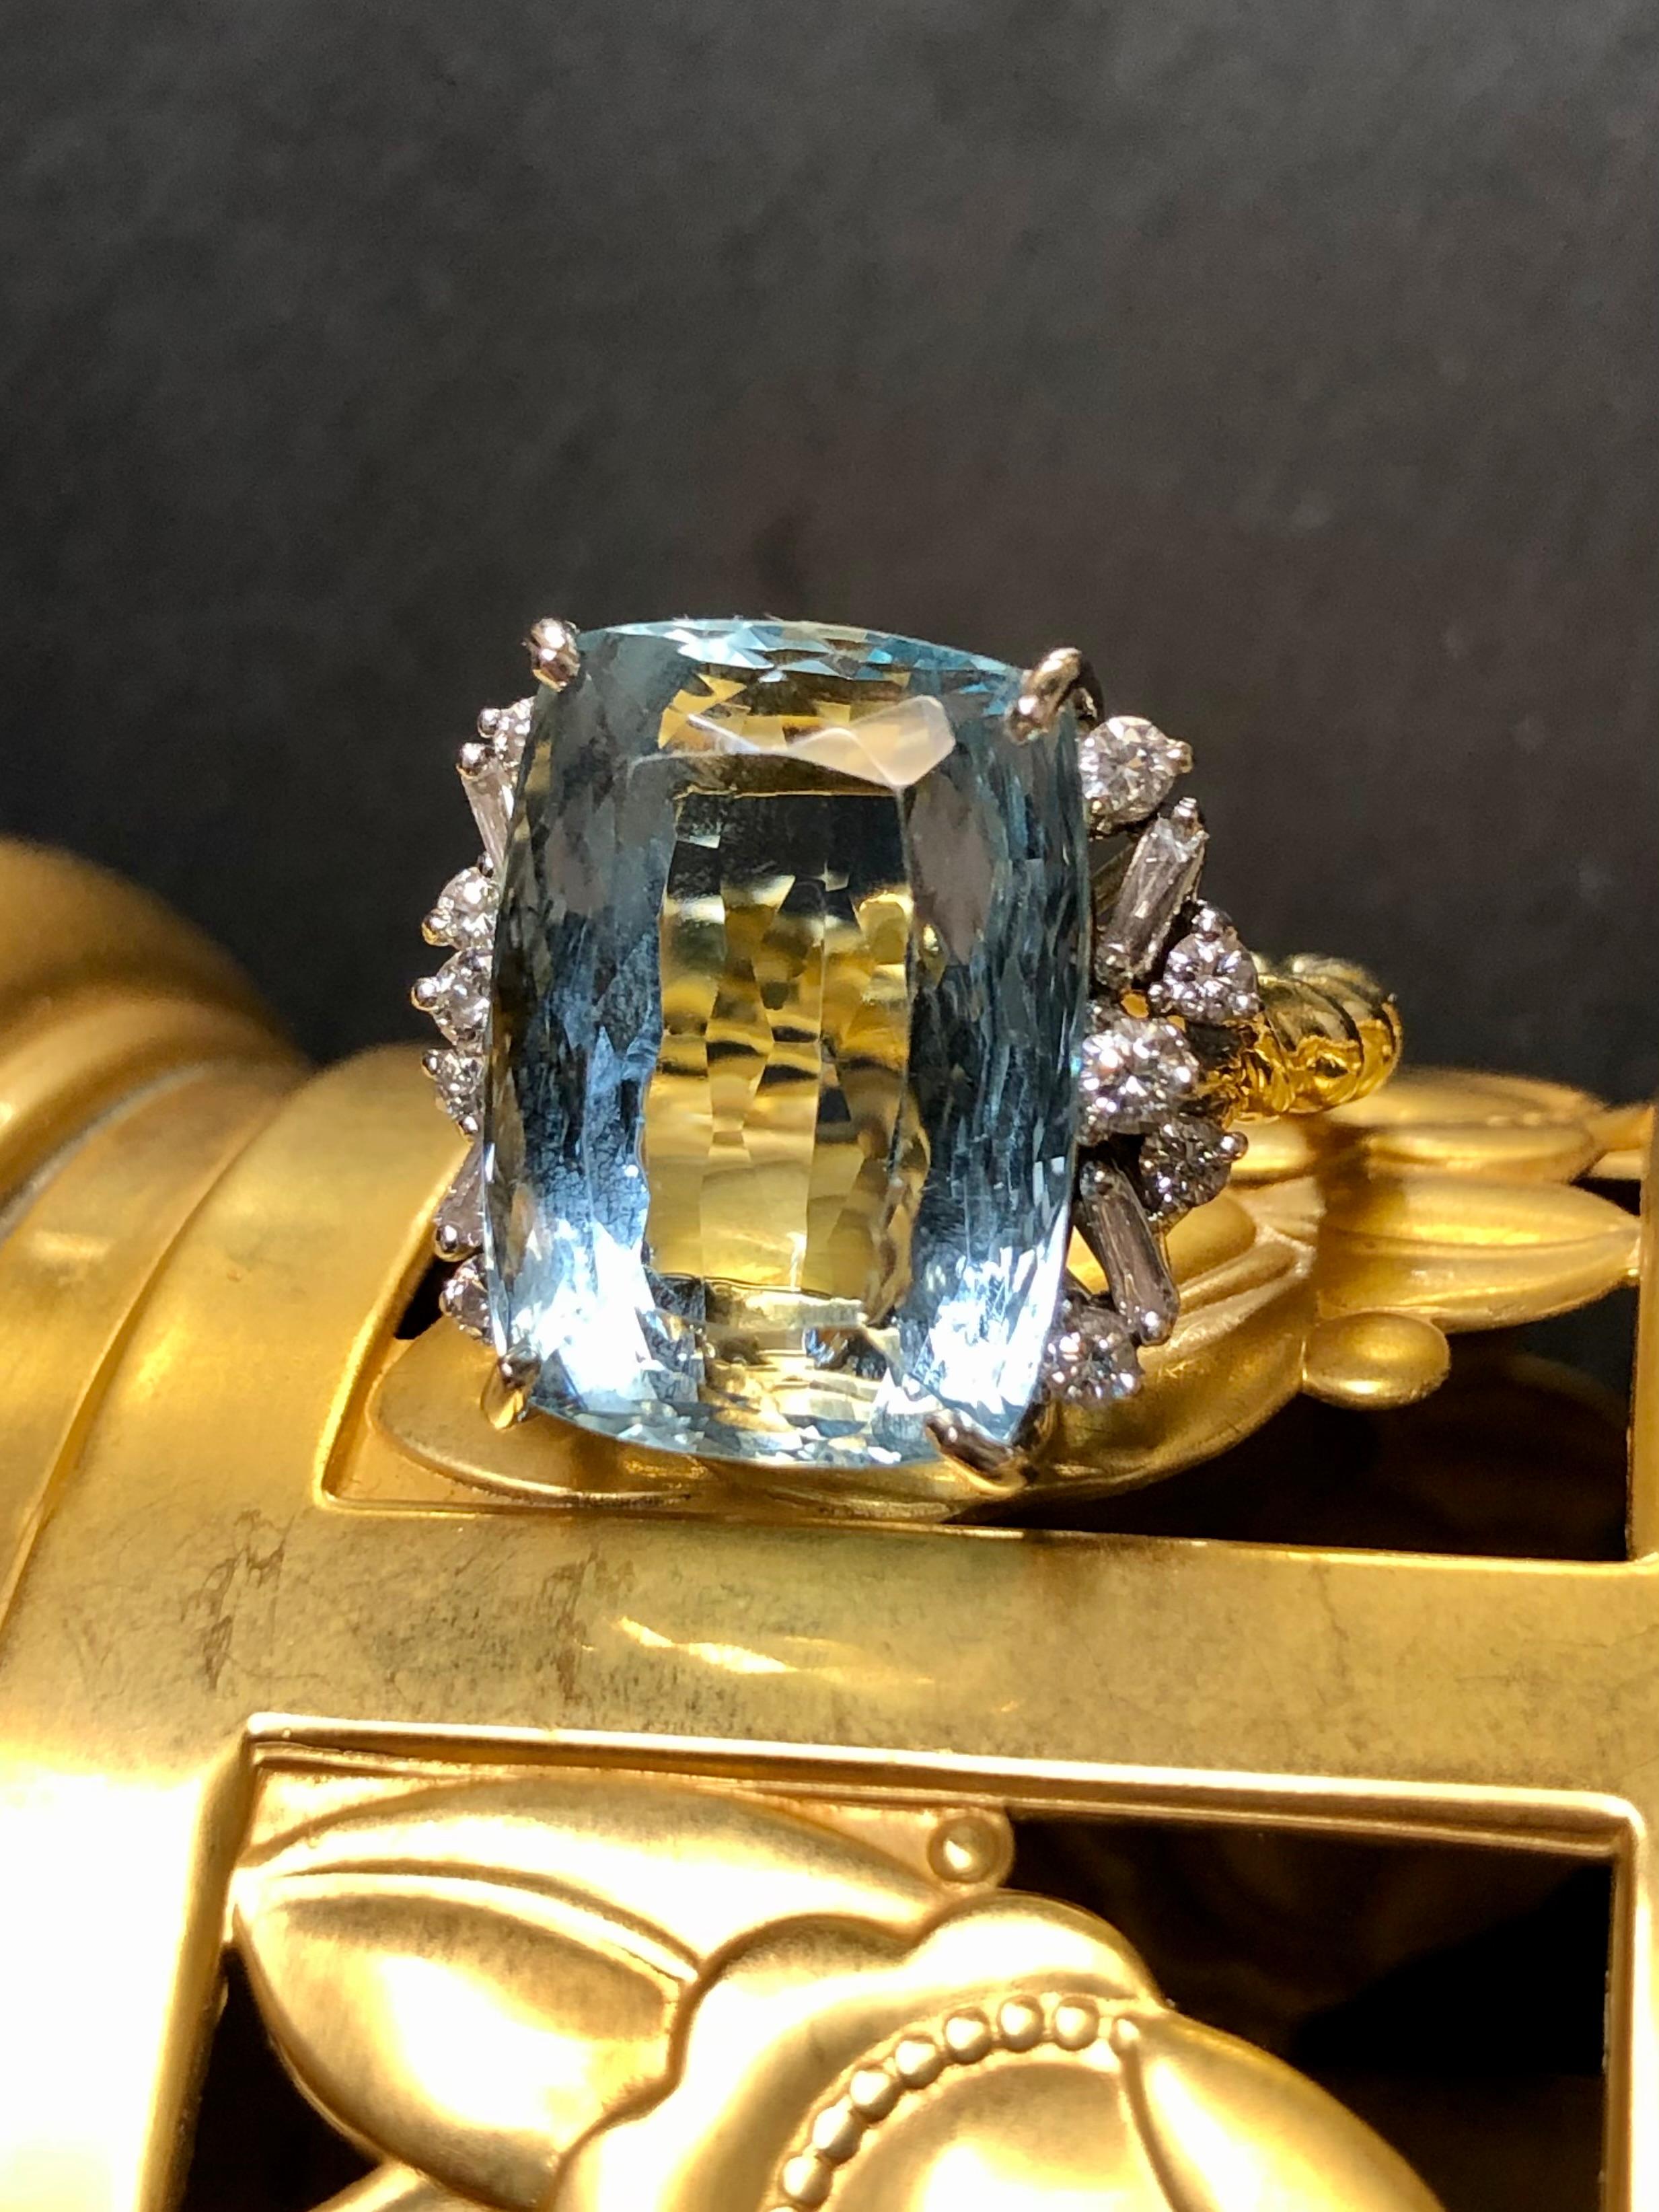 A stunner of a ring c. the 1960’s done in 18K yellow and white gold centered by an approximately 15.50ct natural, elongated cushion cut aquamarine flanked by approximately .70cttw in tapered baguette and round cut diamonds averaging G-H color and